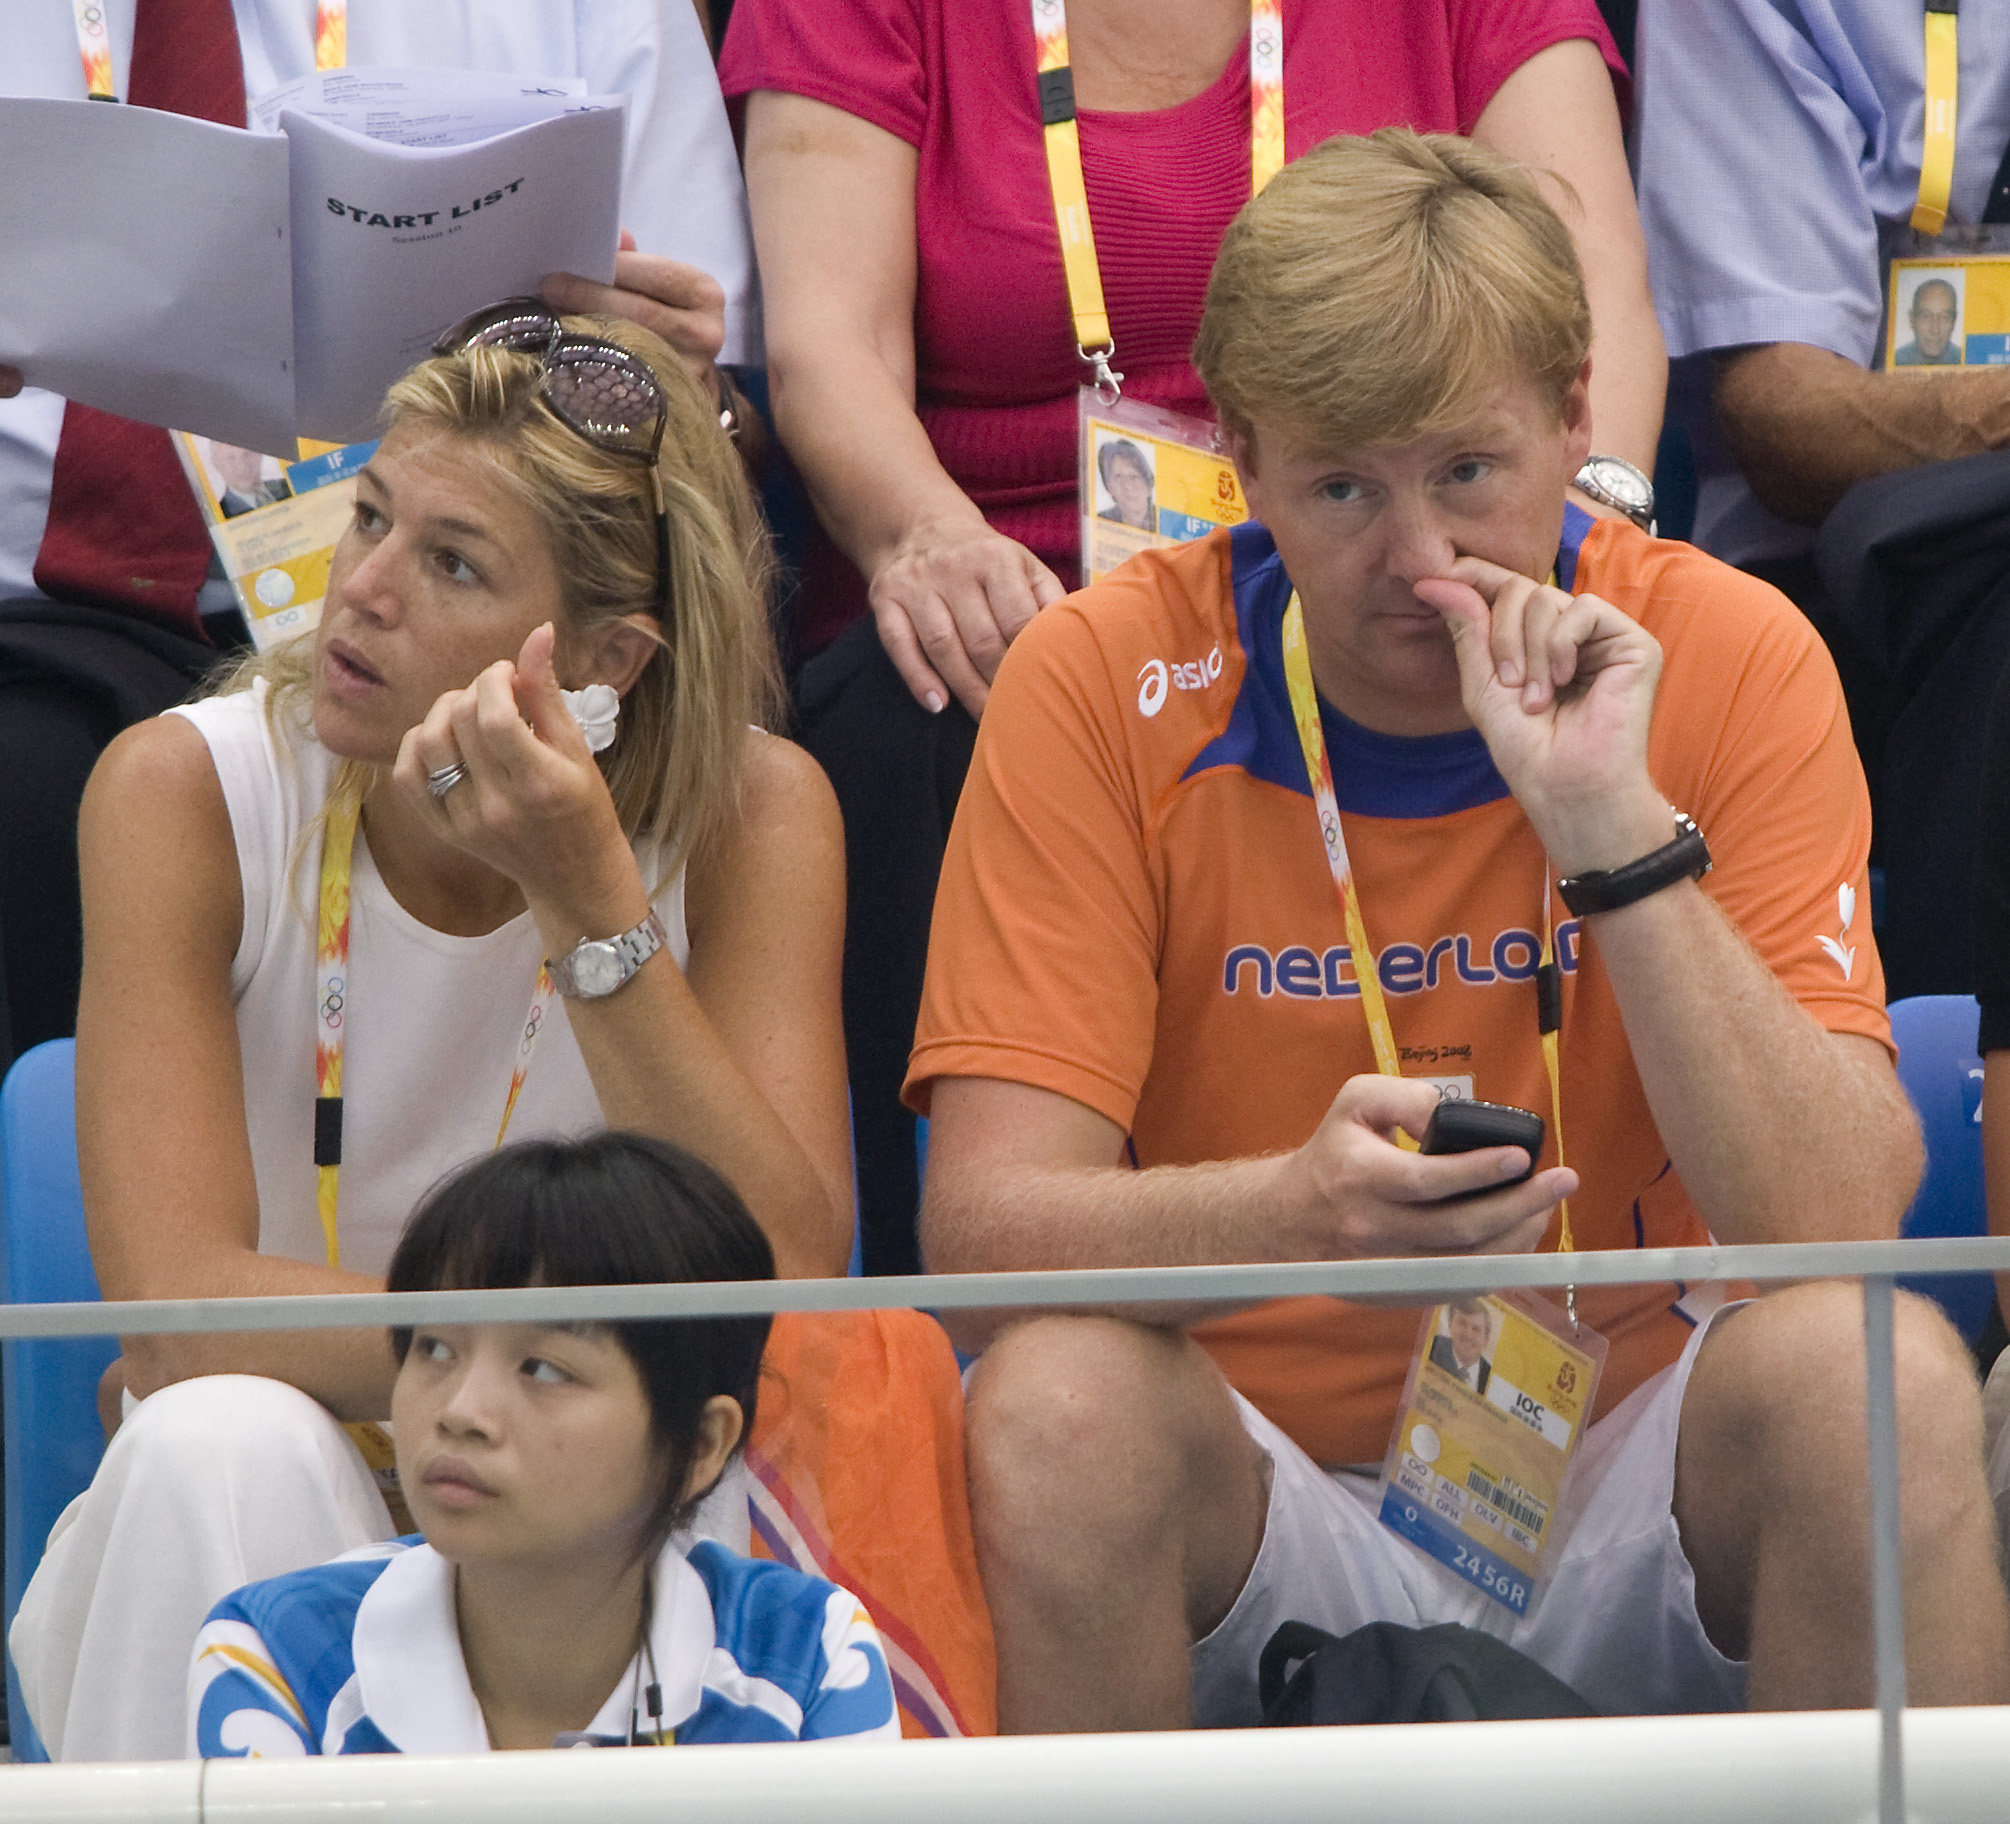 King Willem Alexander of The Netherlands going for gold at the 2008 Beijing Olympics.